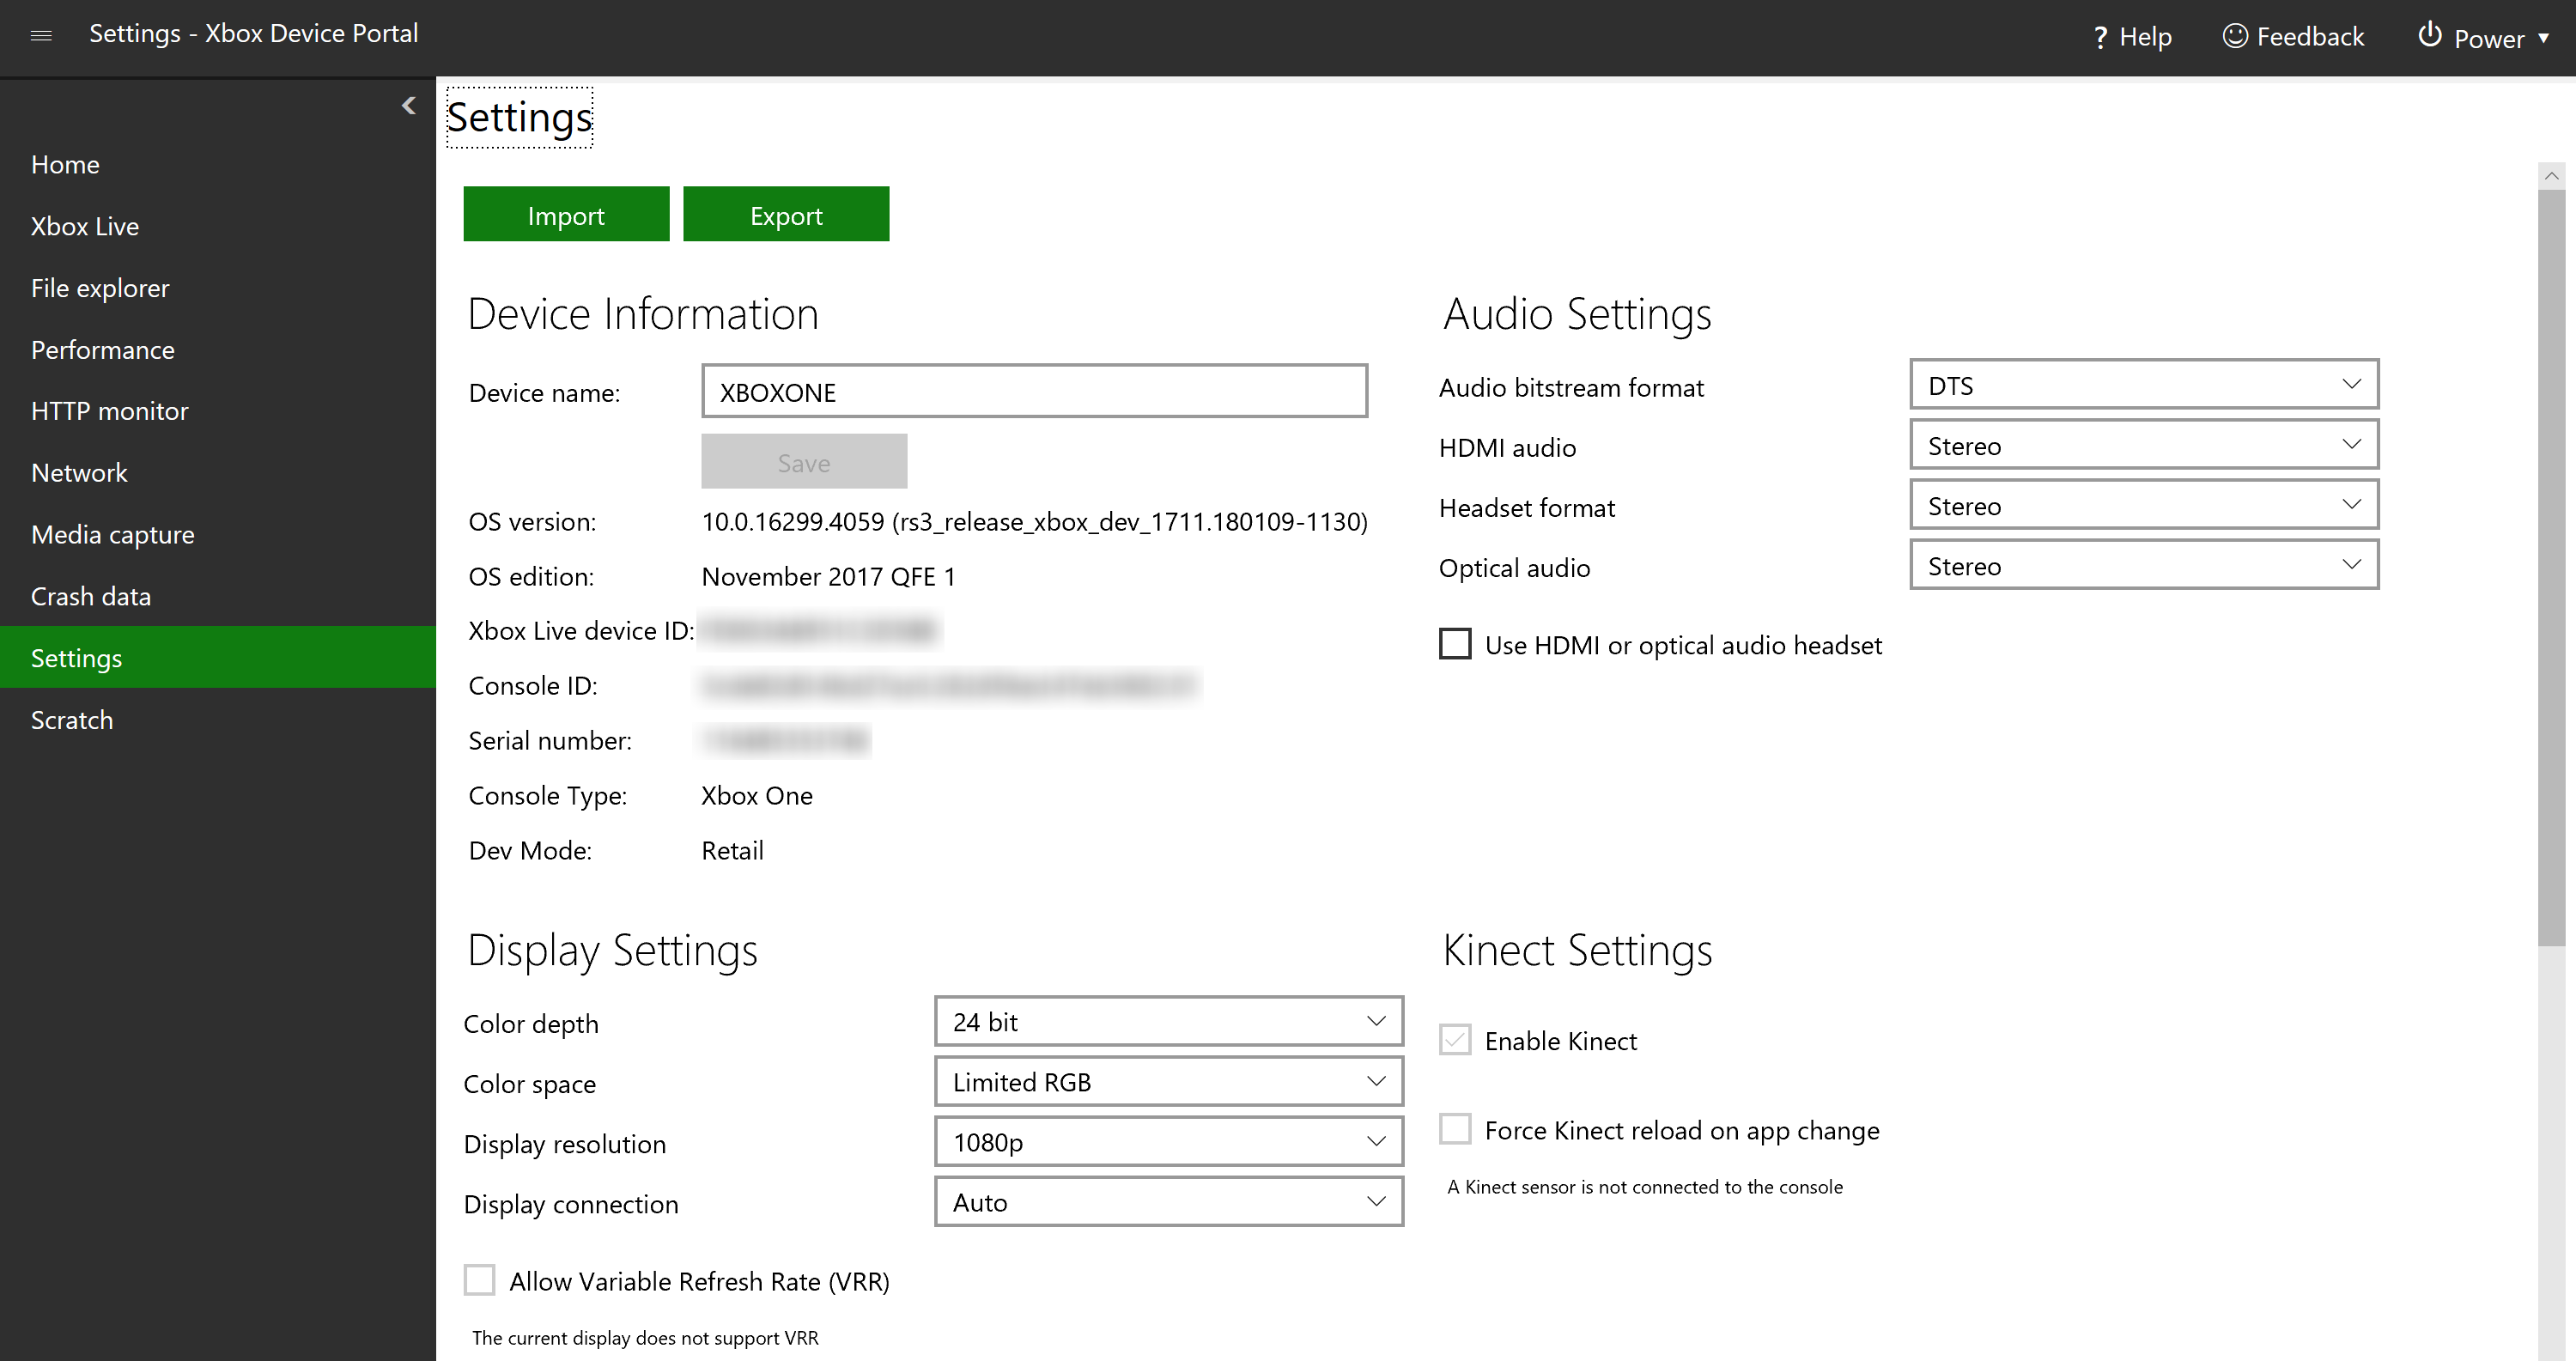 Network settings page on Xbox console